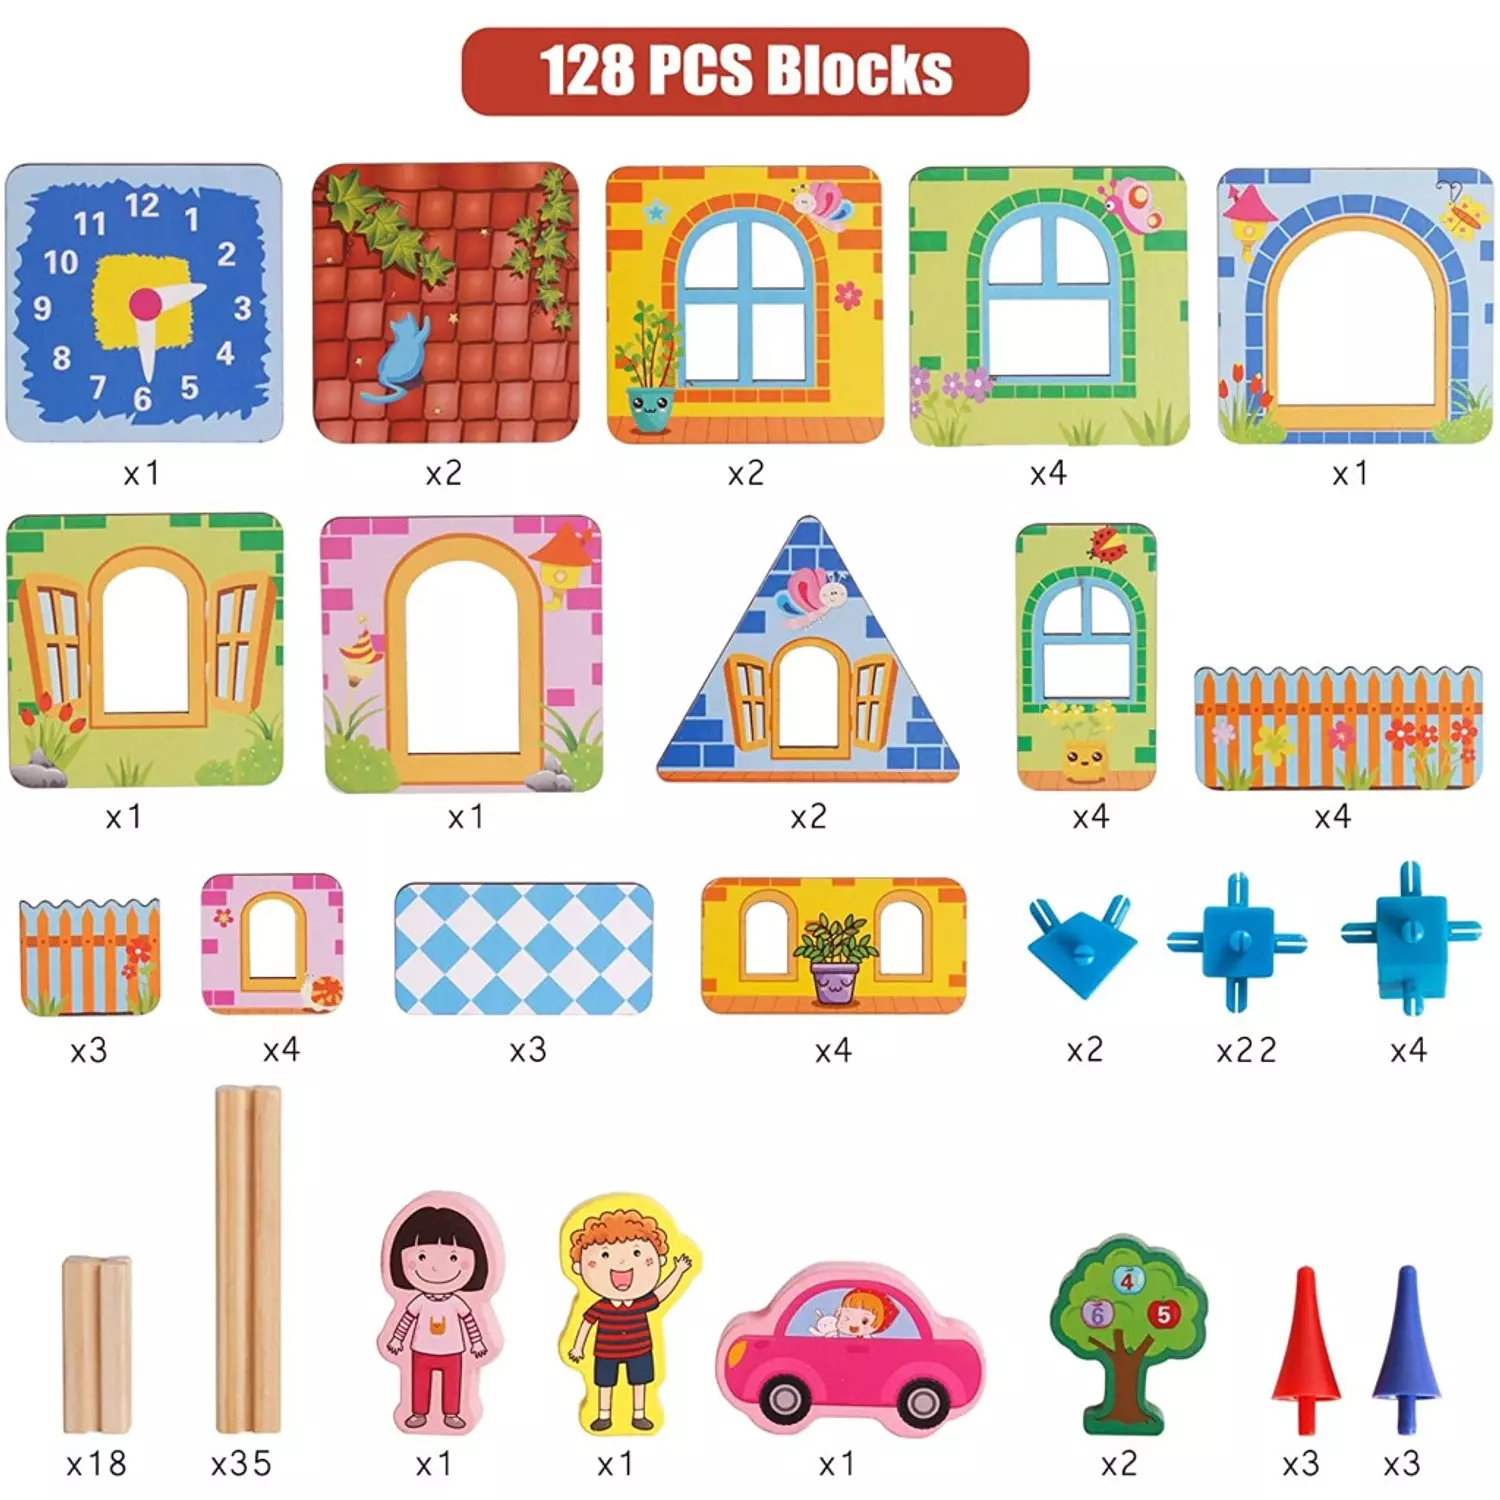 Master of Architecture Building Blocks Toy 6